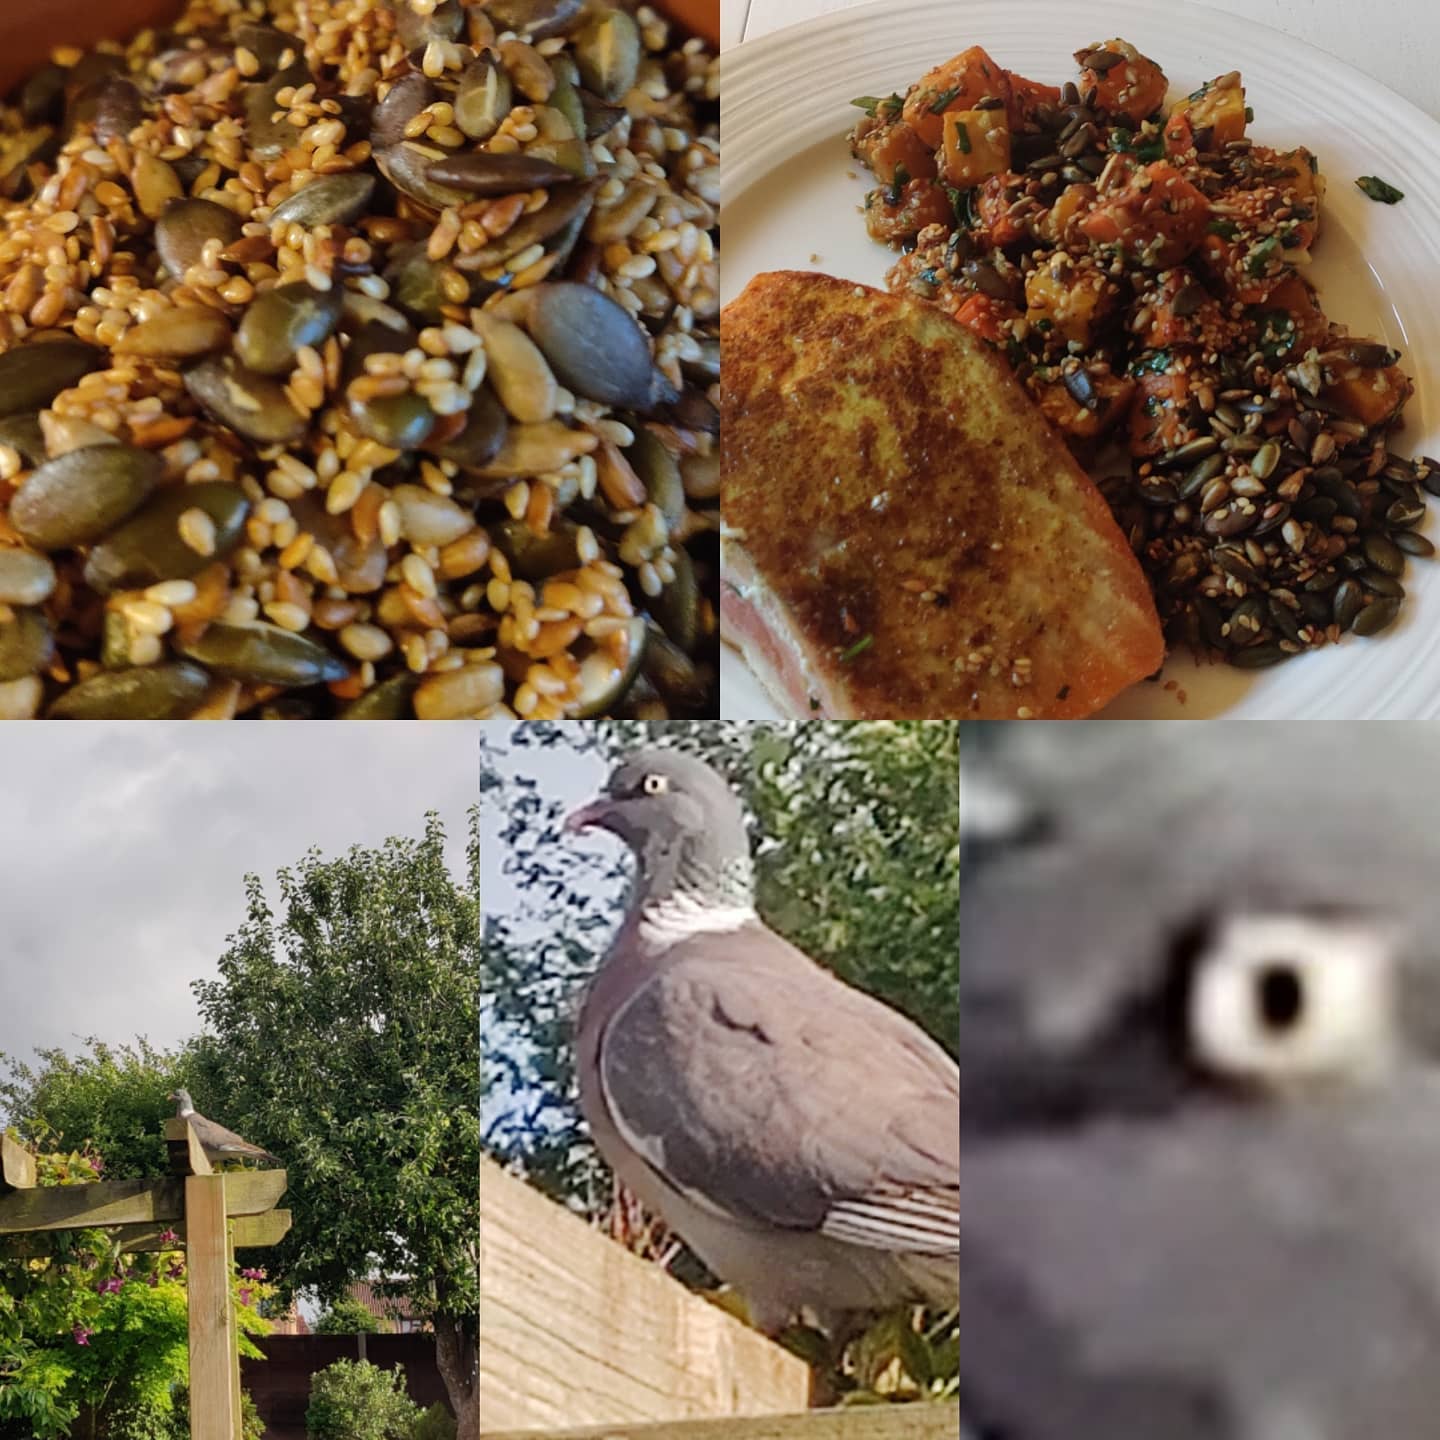 So to round out a trio of food posts, tonight we dipped into the @marcuswareing catalogue again for Curry Spiced Salmon with seeded pumpkin salad, and I hadn't realised quite how many seeds were involved. It was utterly delicious, but I'm now worried about being stalked by the massive pigeon that frequents our yard. When he's done with that bird-feeder, I now fear we're next. #fatpigeon #thebirds #seedy